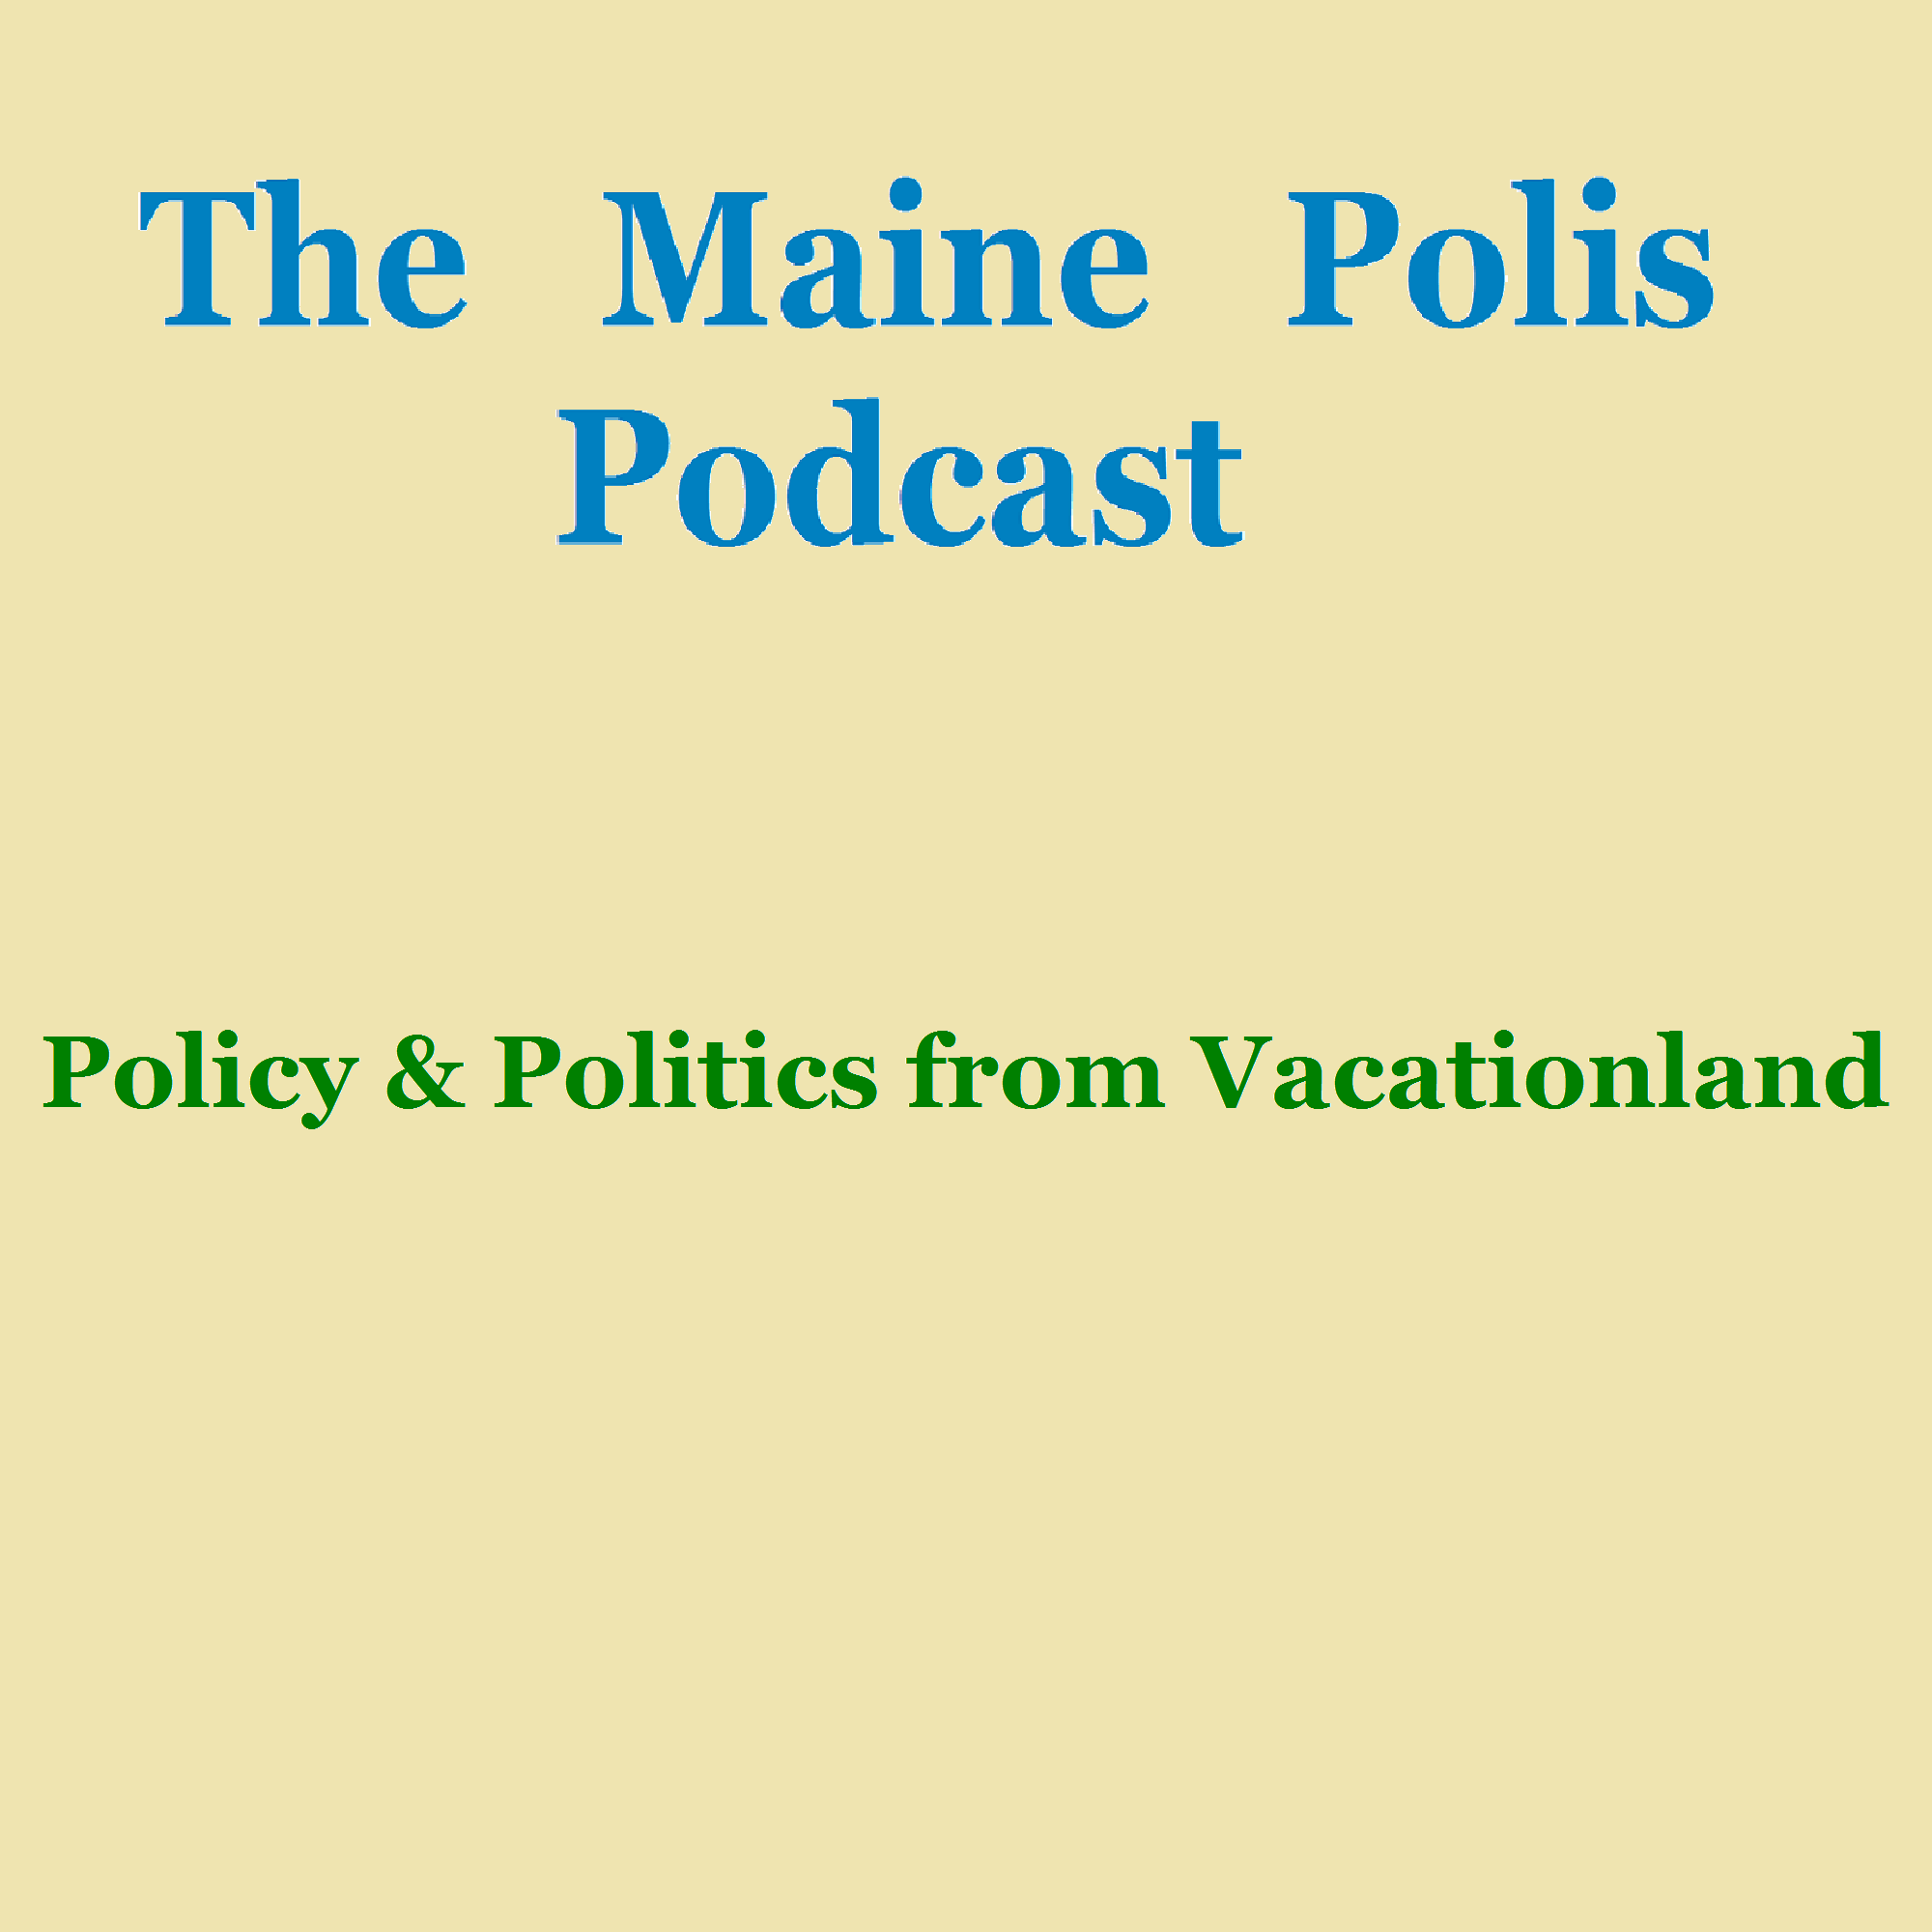 TMP Podcast #1 - Sara Gideon's Time at the State House